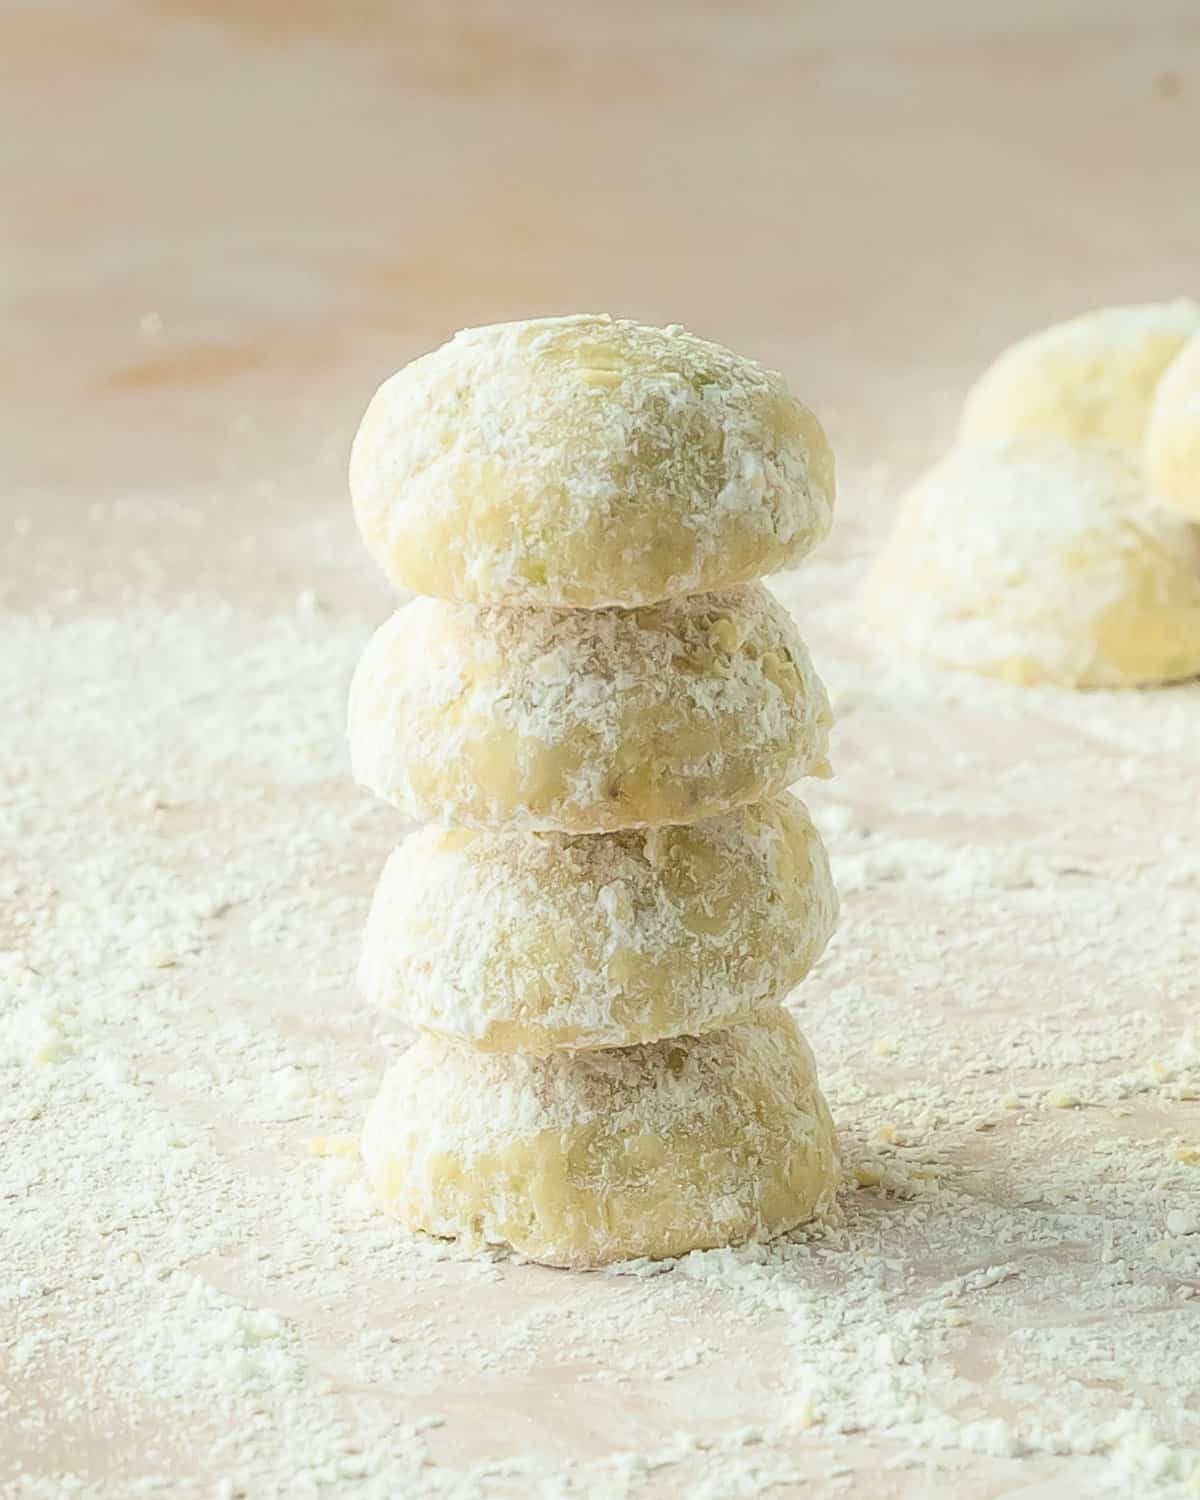 Pistachio cookies are thick, soft and buttery drop cookies made with real pistachios. These pistachio drop cookies are coated in powdered sugar giving a fresh flavor twist to the classic snowball cookie. This recipe for pistachio cookies is quick and easy and makes the perfect festive cookie for any occasion. 